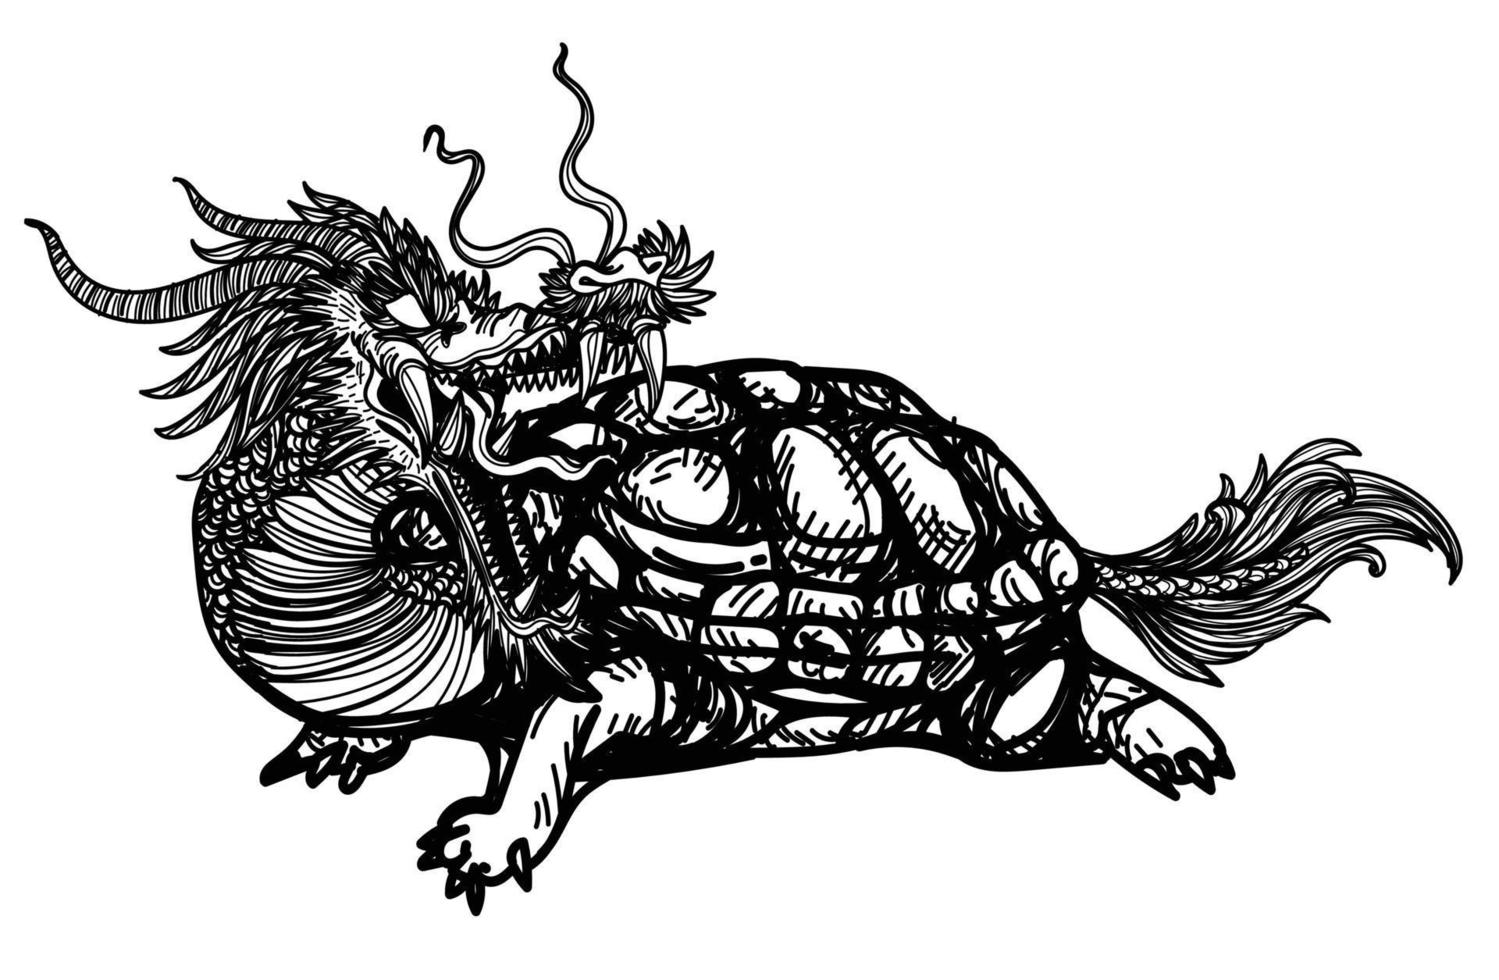 Tattoo art dragon body turtle  hand drawing sketch black and white vector